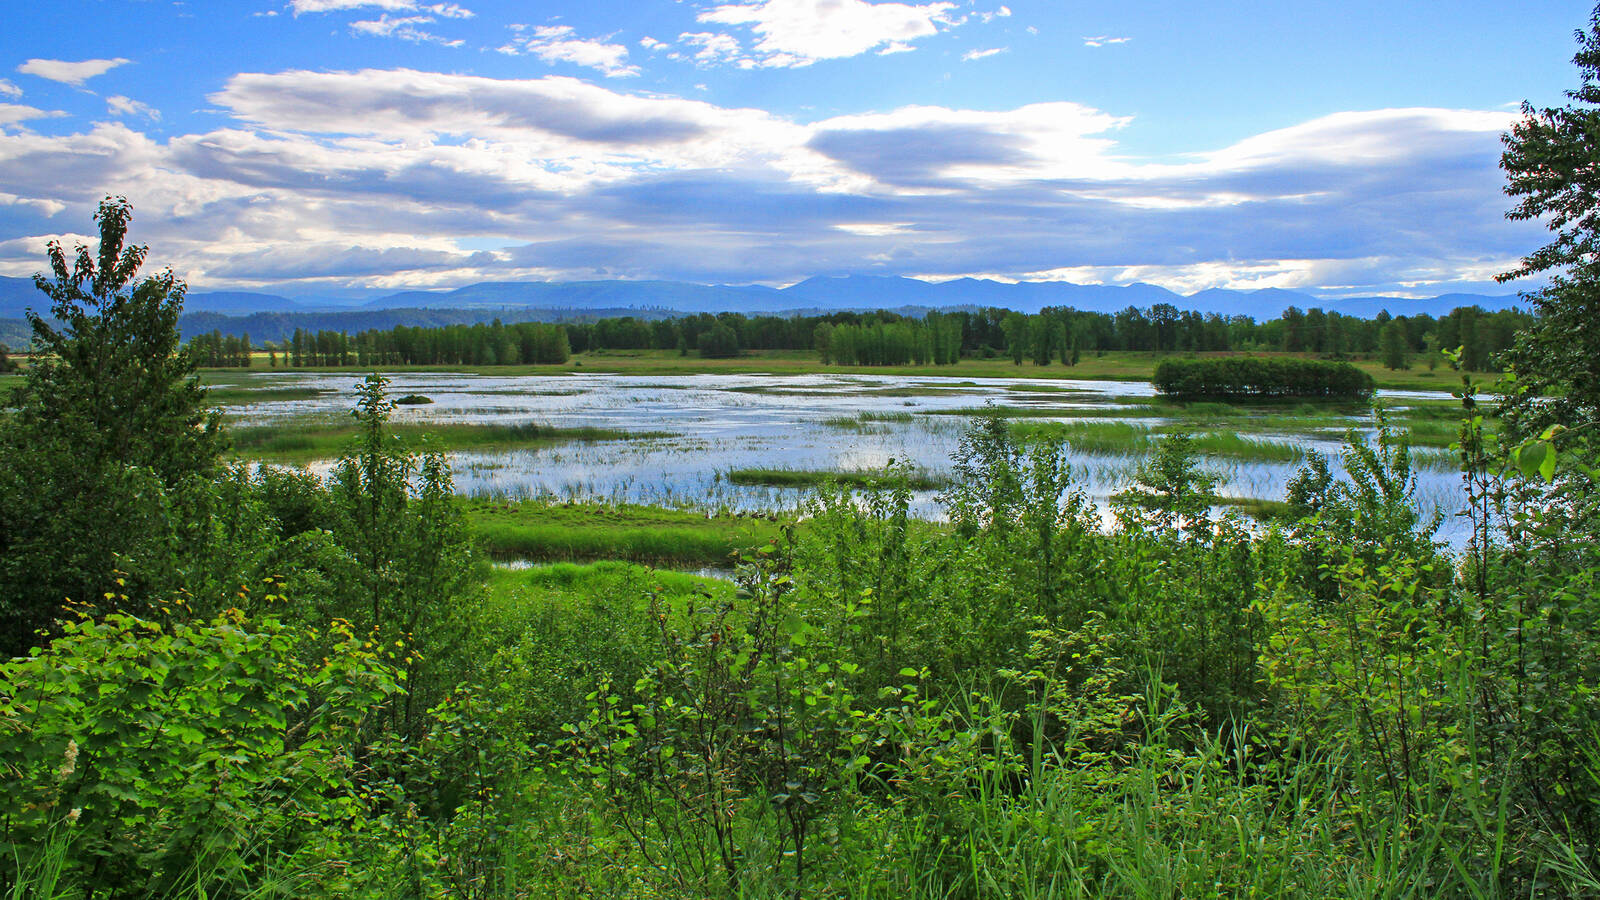 <p>Habitat restoration at Kootenai National Wildlife Refuge in Idaho. Funding helped restore water structures and remove invasive species from the refuge to support hundreds of species of waterfowl that use the refuge to rest, feed and raise their young.</p>